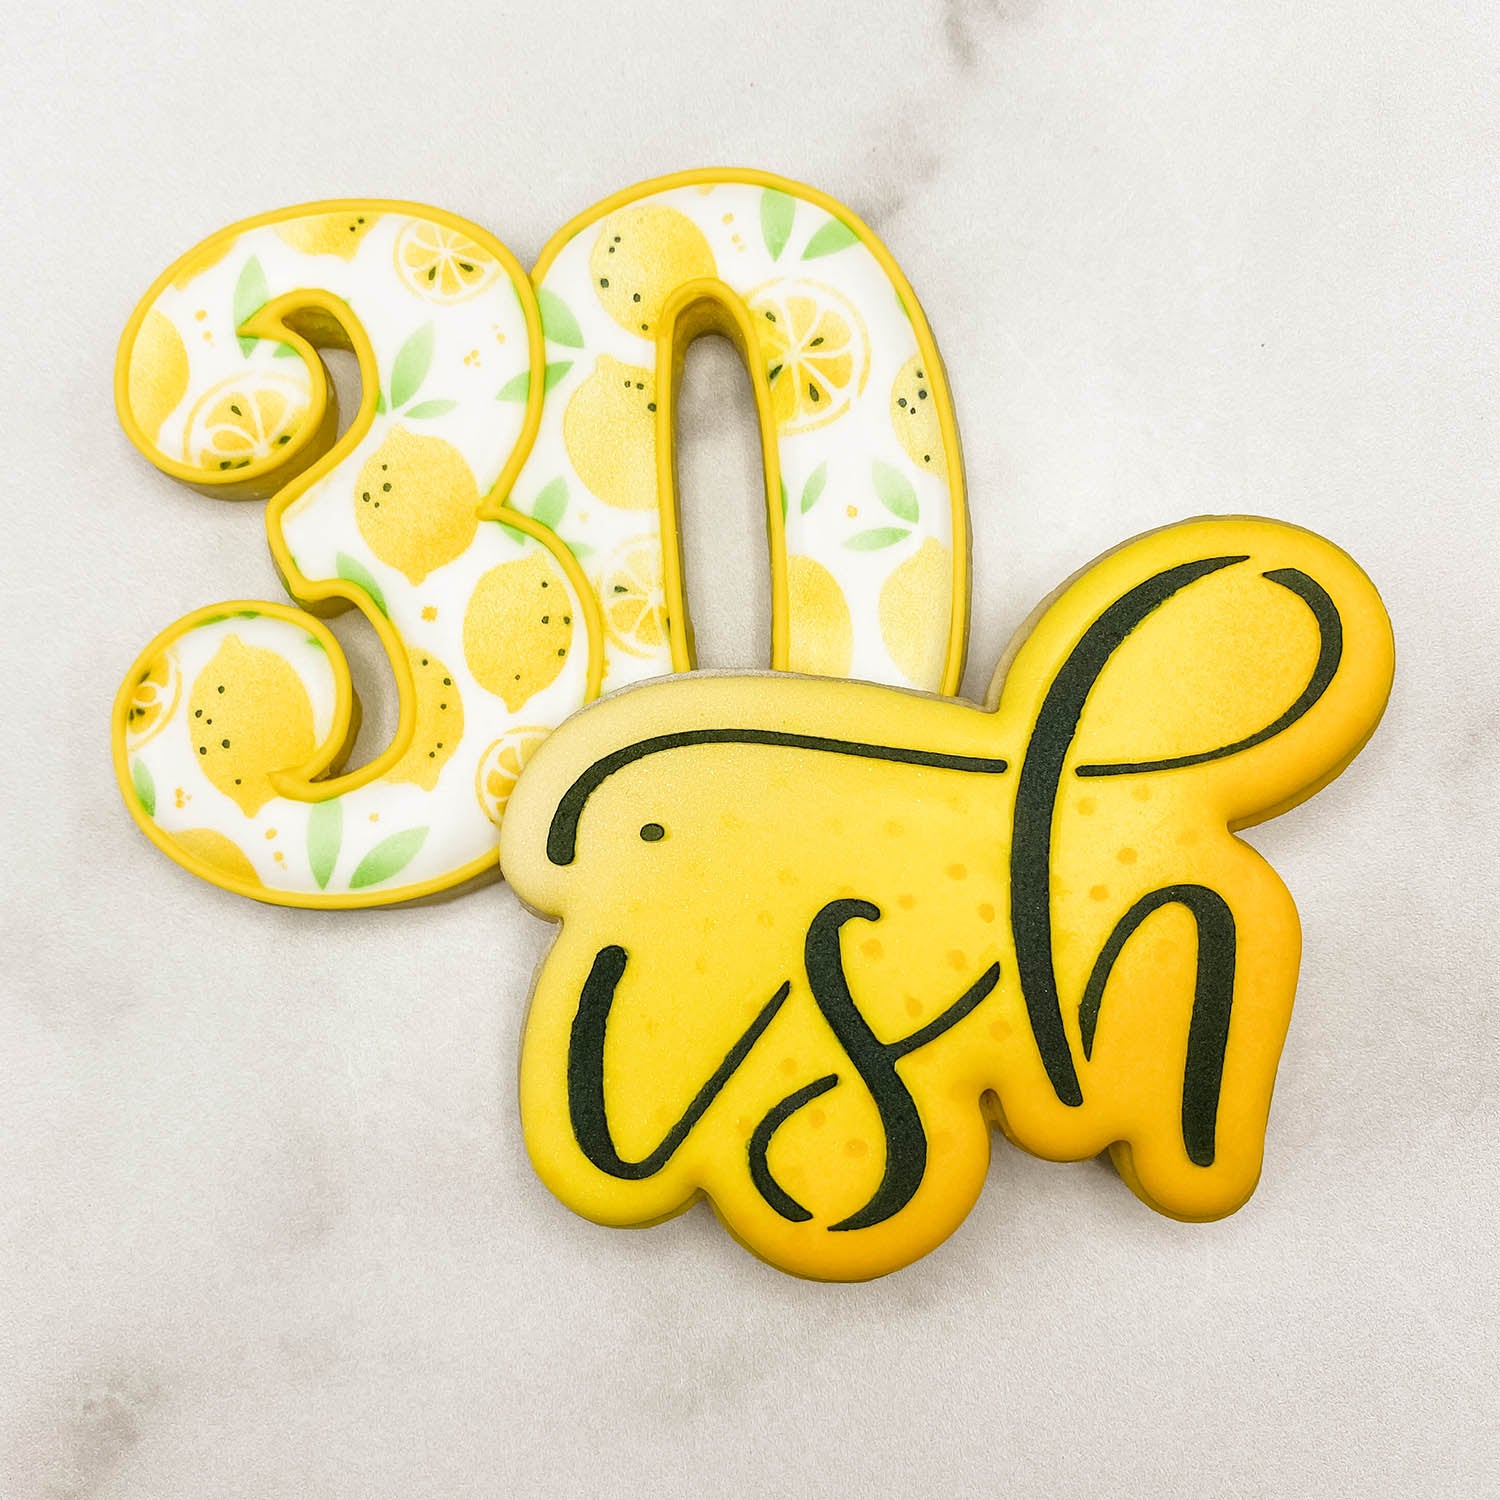 cookie cutter with hand lettered script reading "ish"